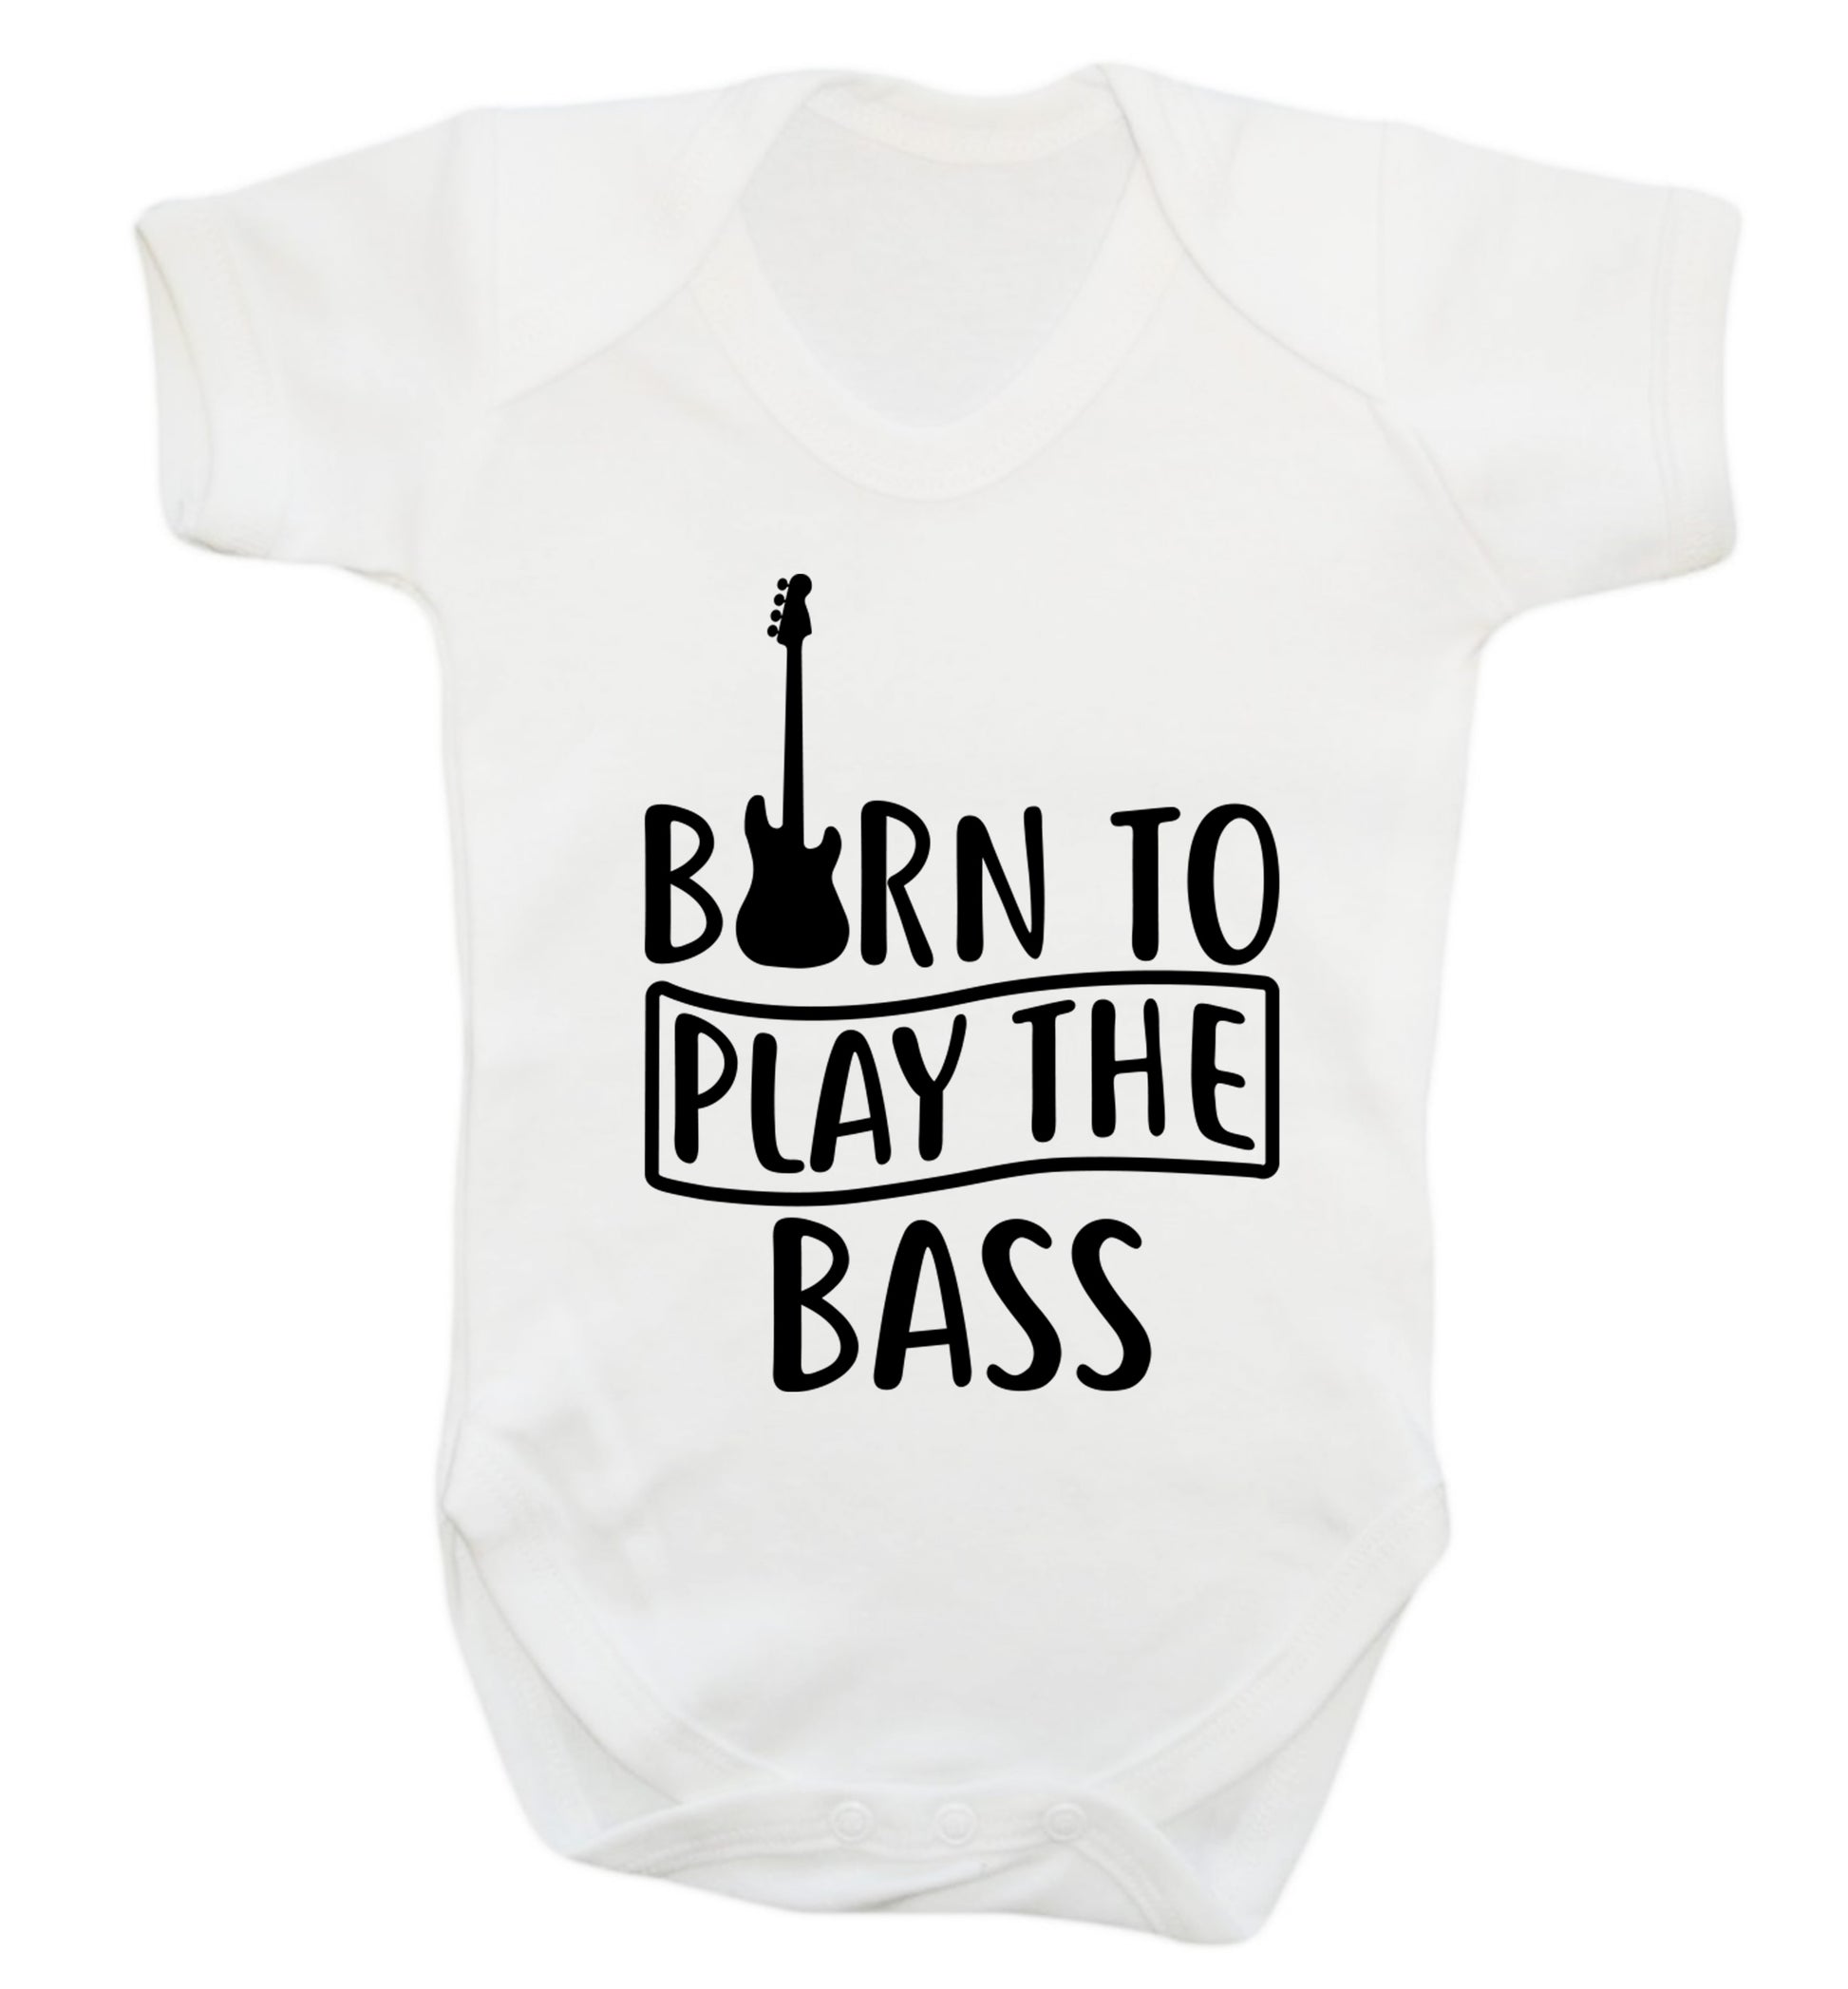 Born to play the bass Baby Vest white 18-24 months